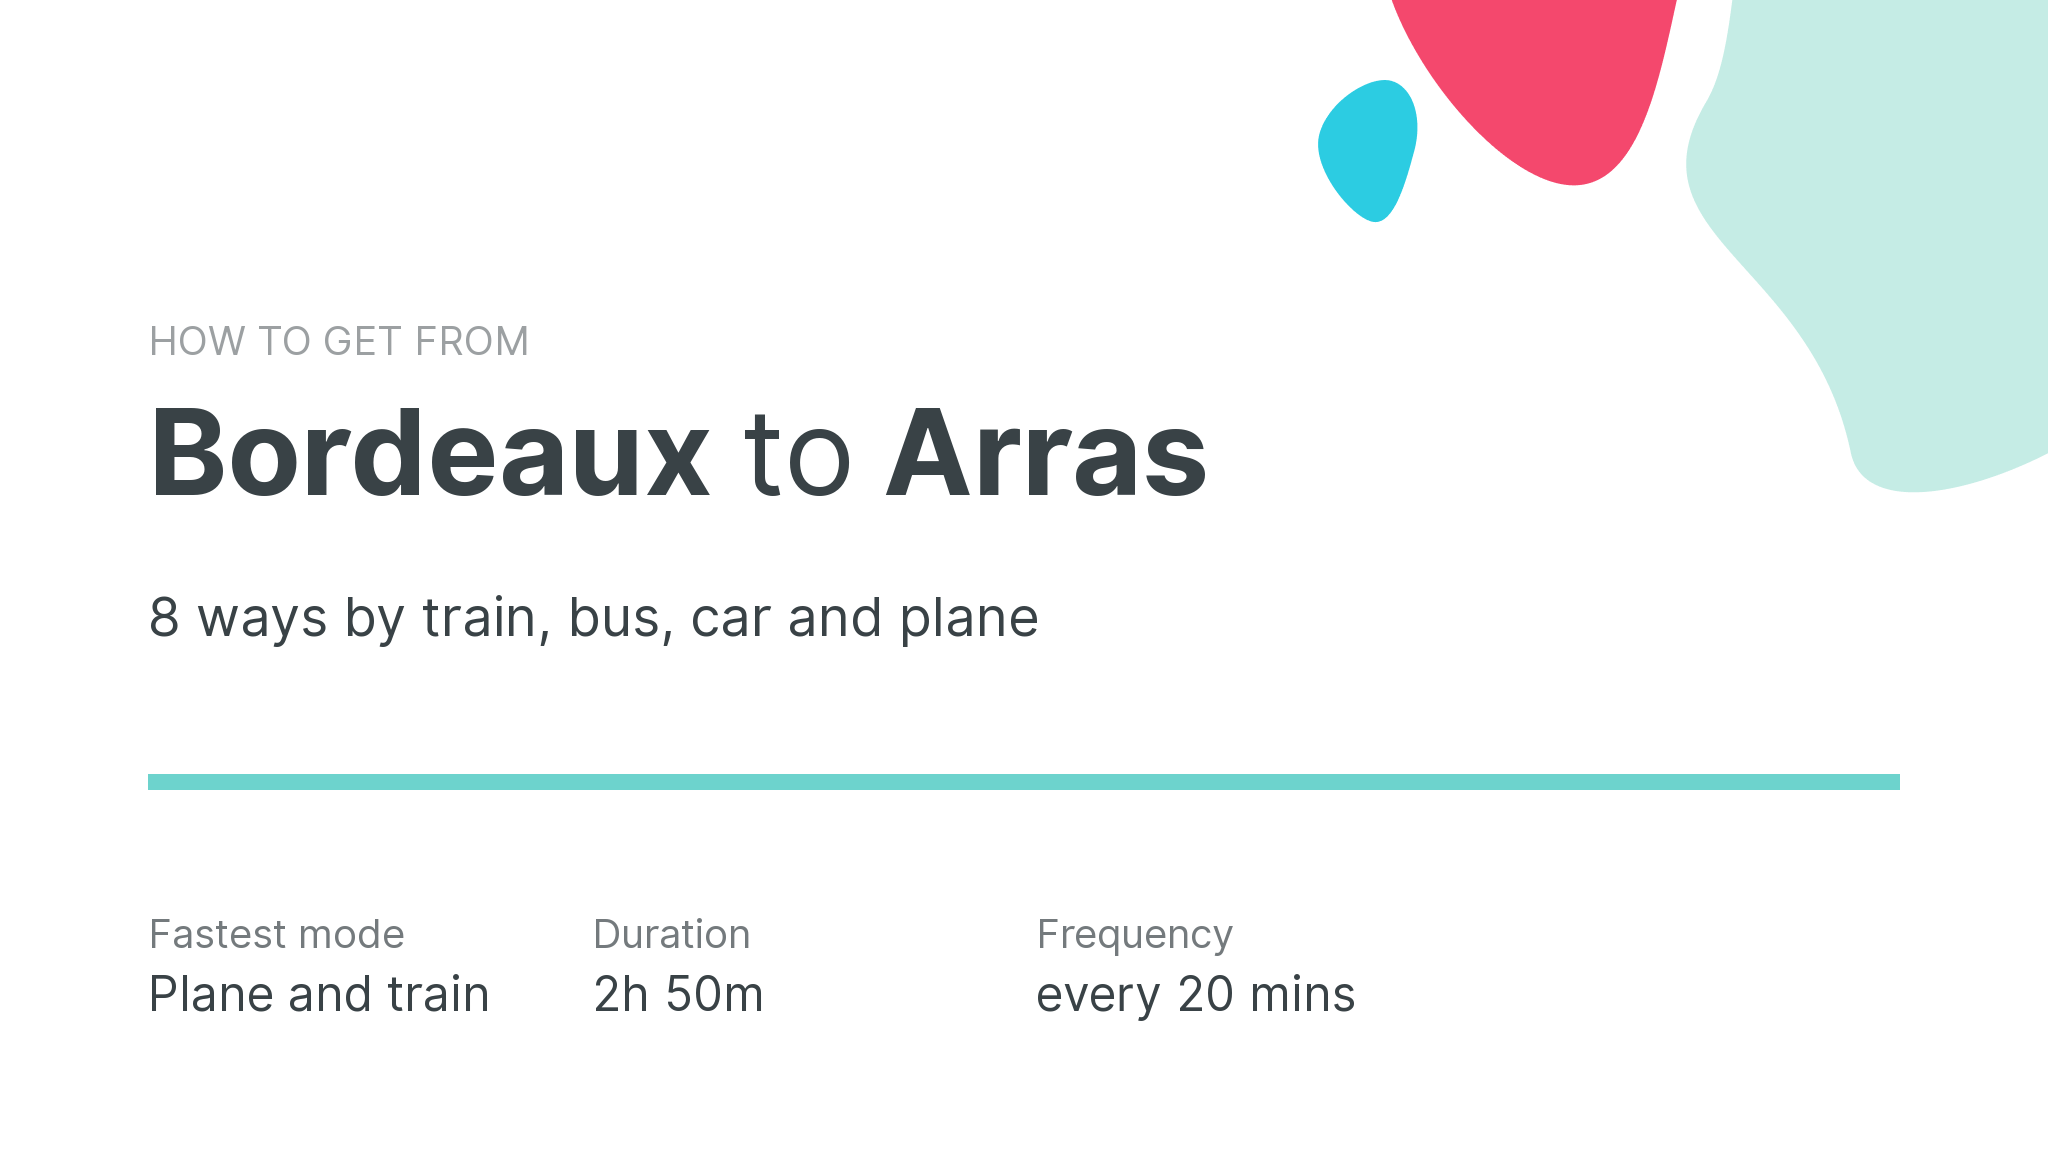 How do I get from Bordeaux to Arras